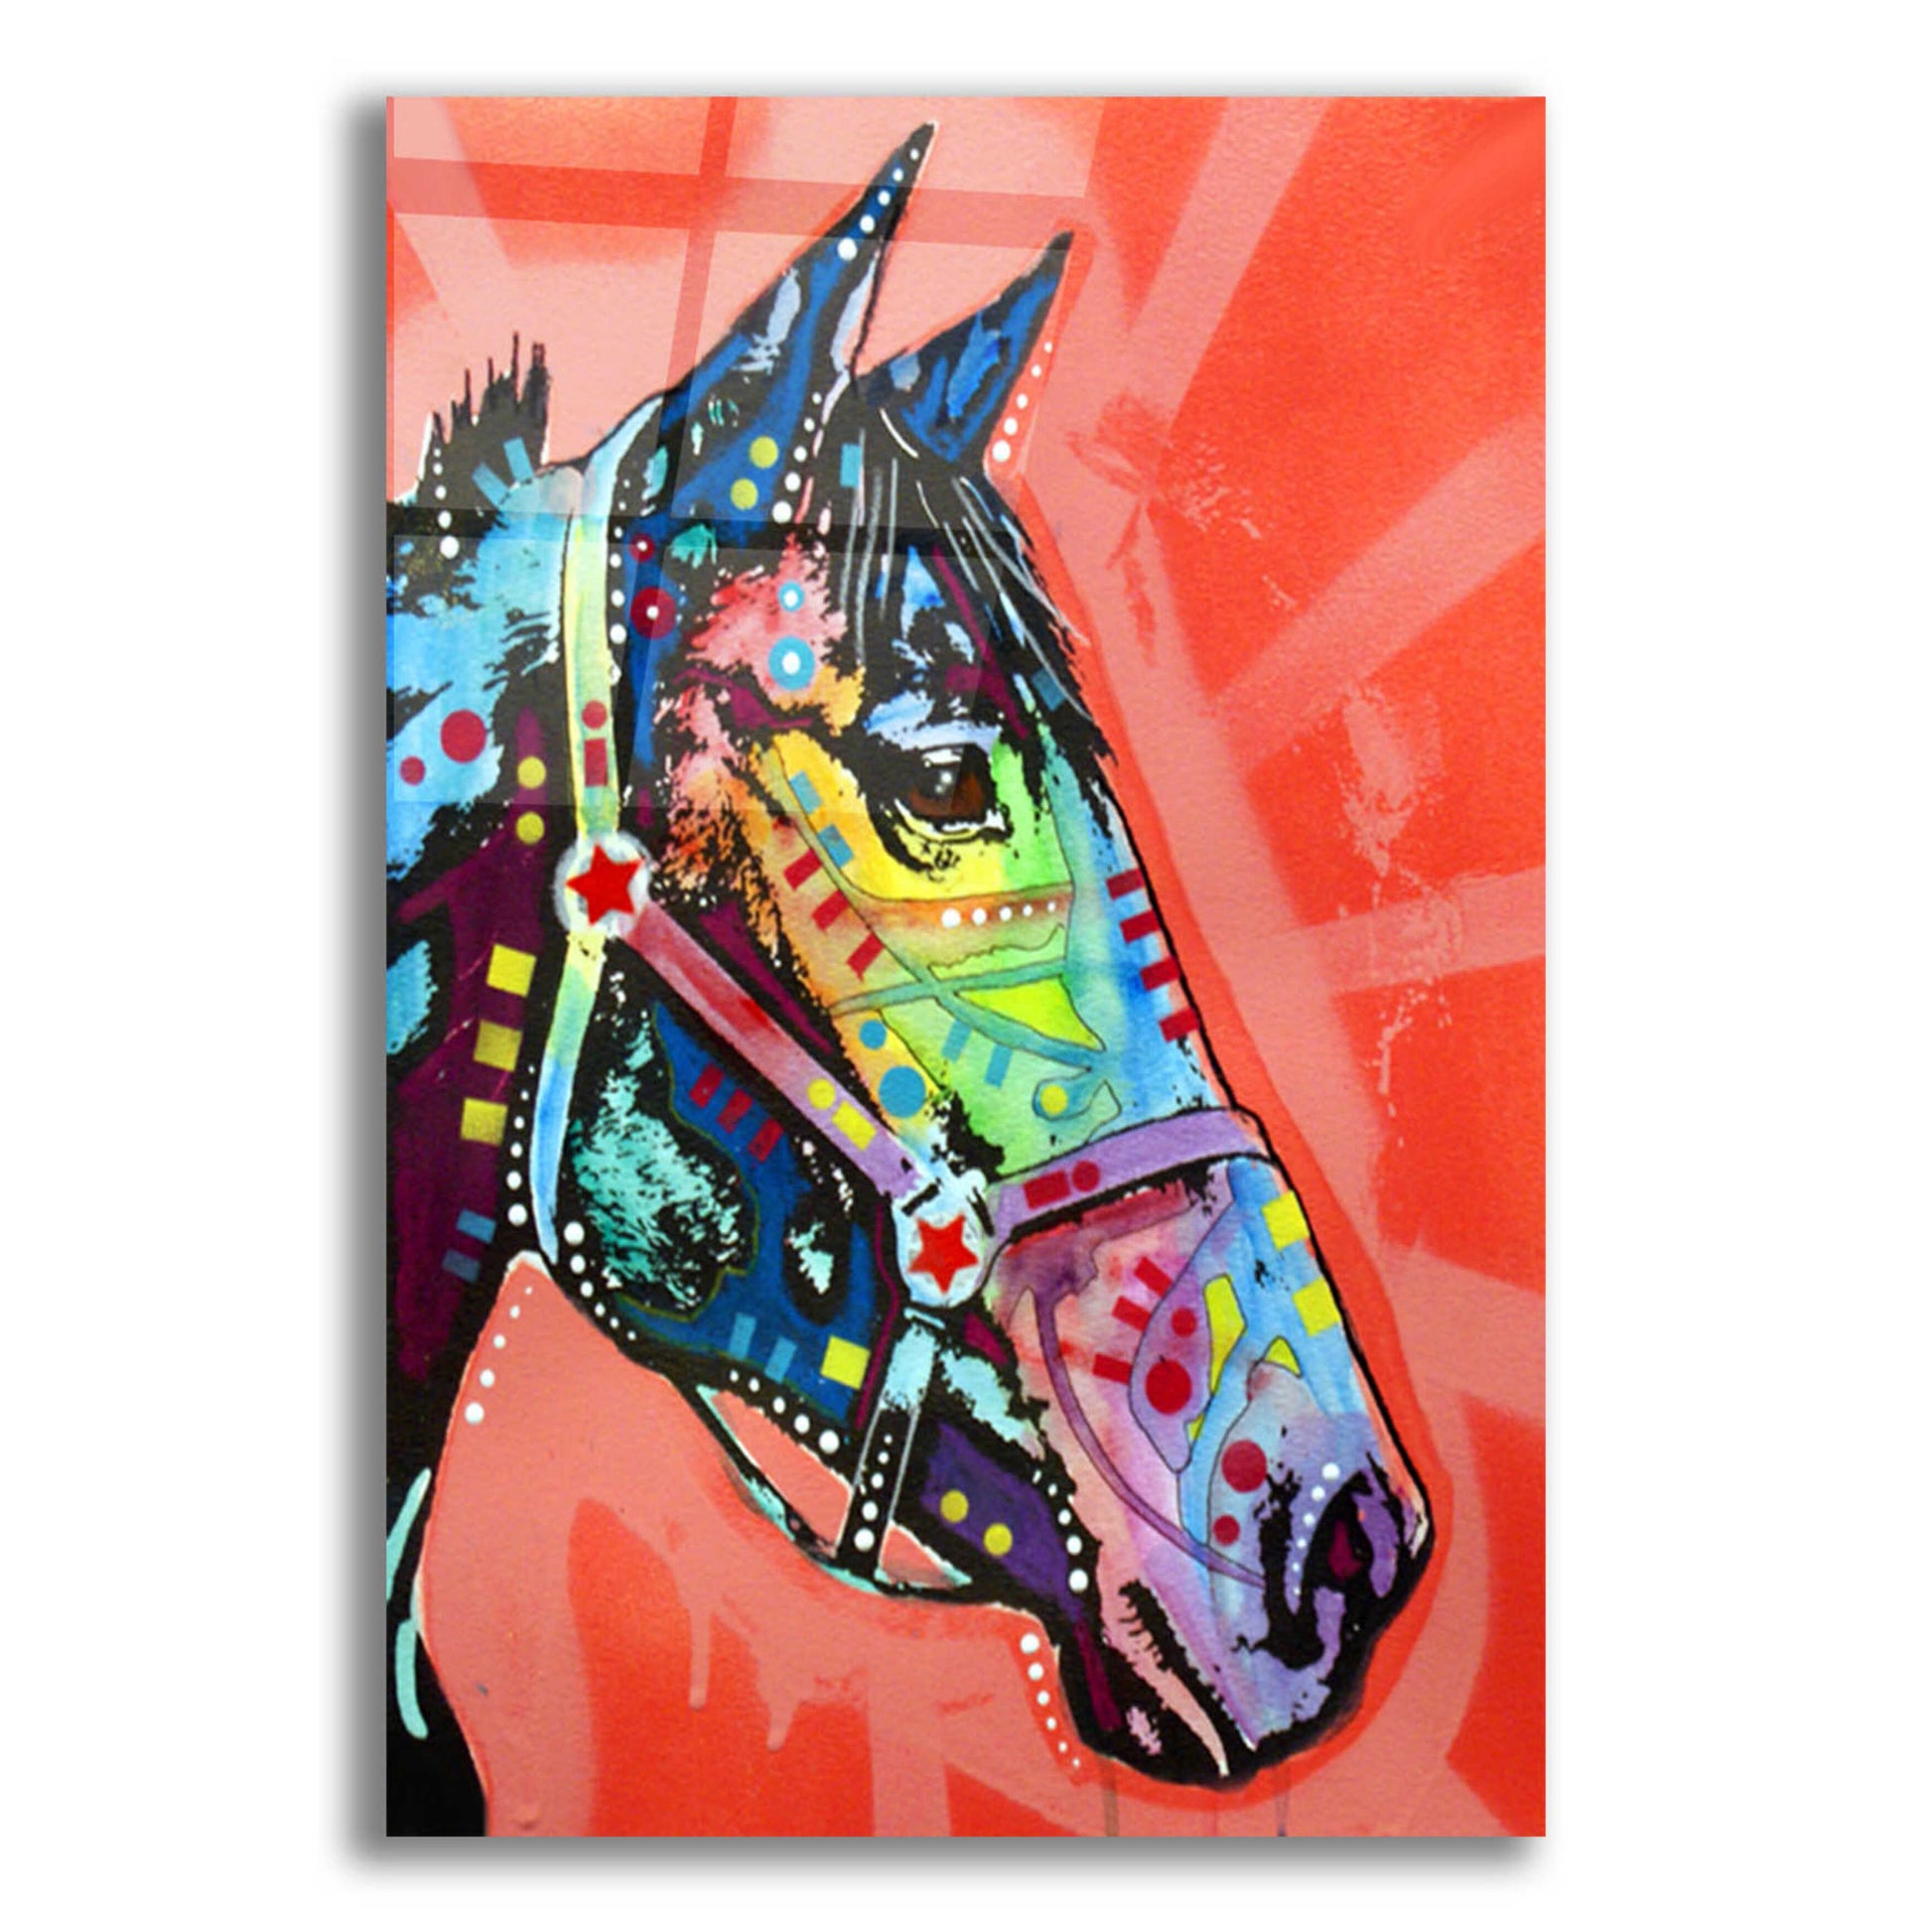 Epic Art 'Wc Horse 3' by Dean Russo, Acrylic Glass Wall Art,12x16